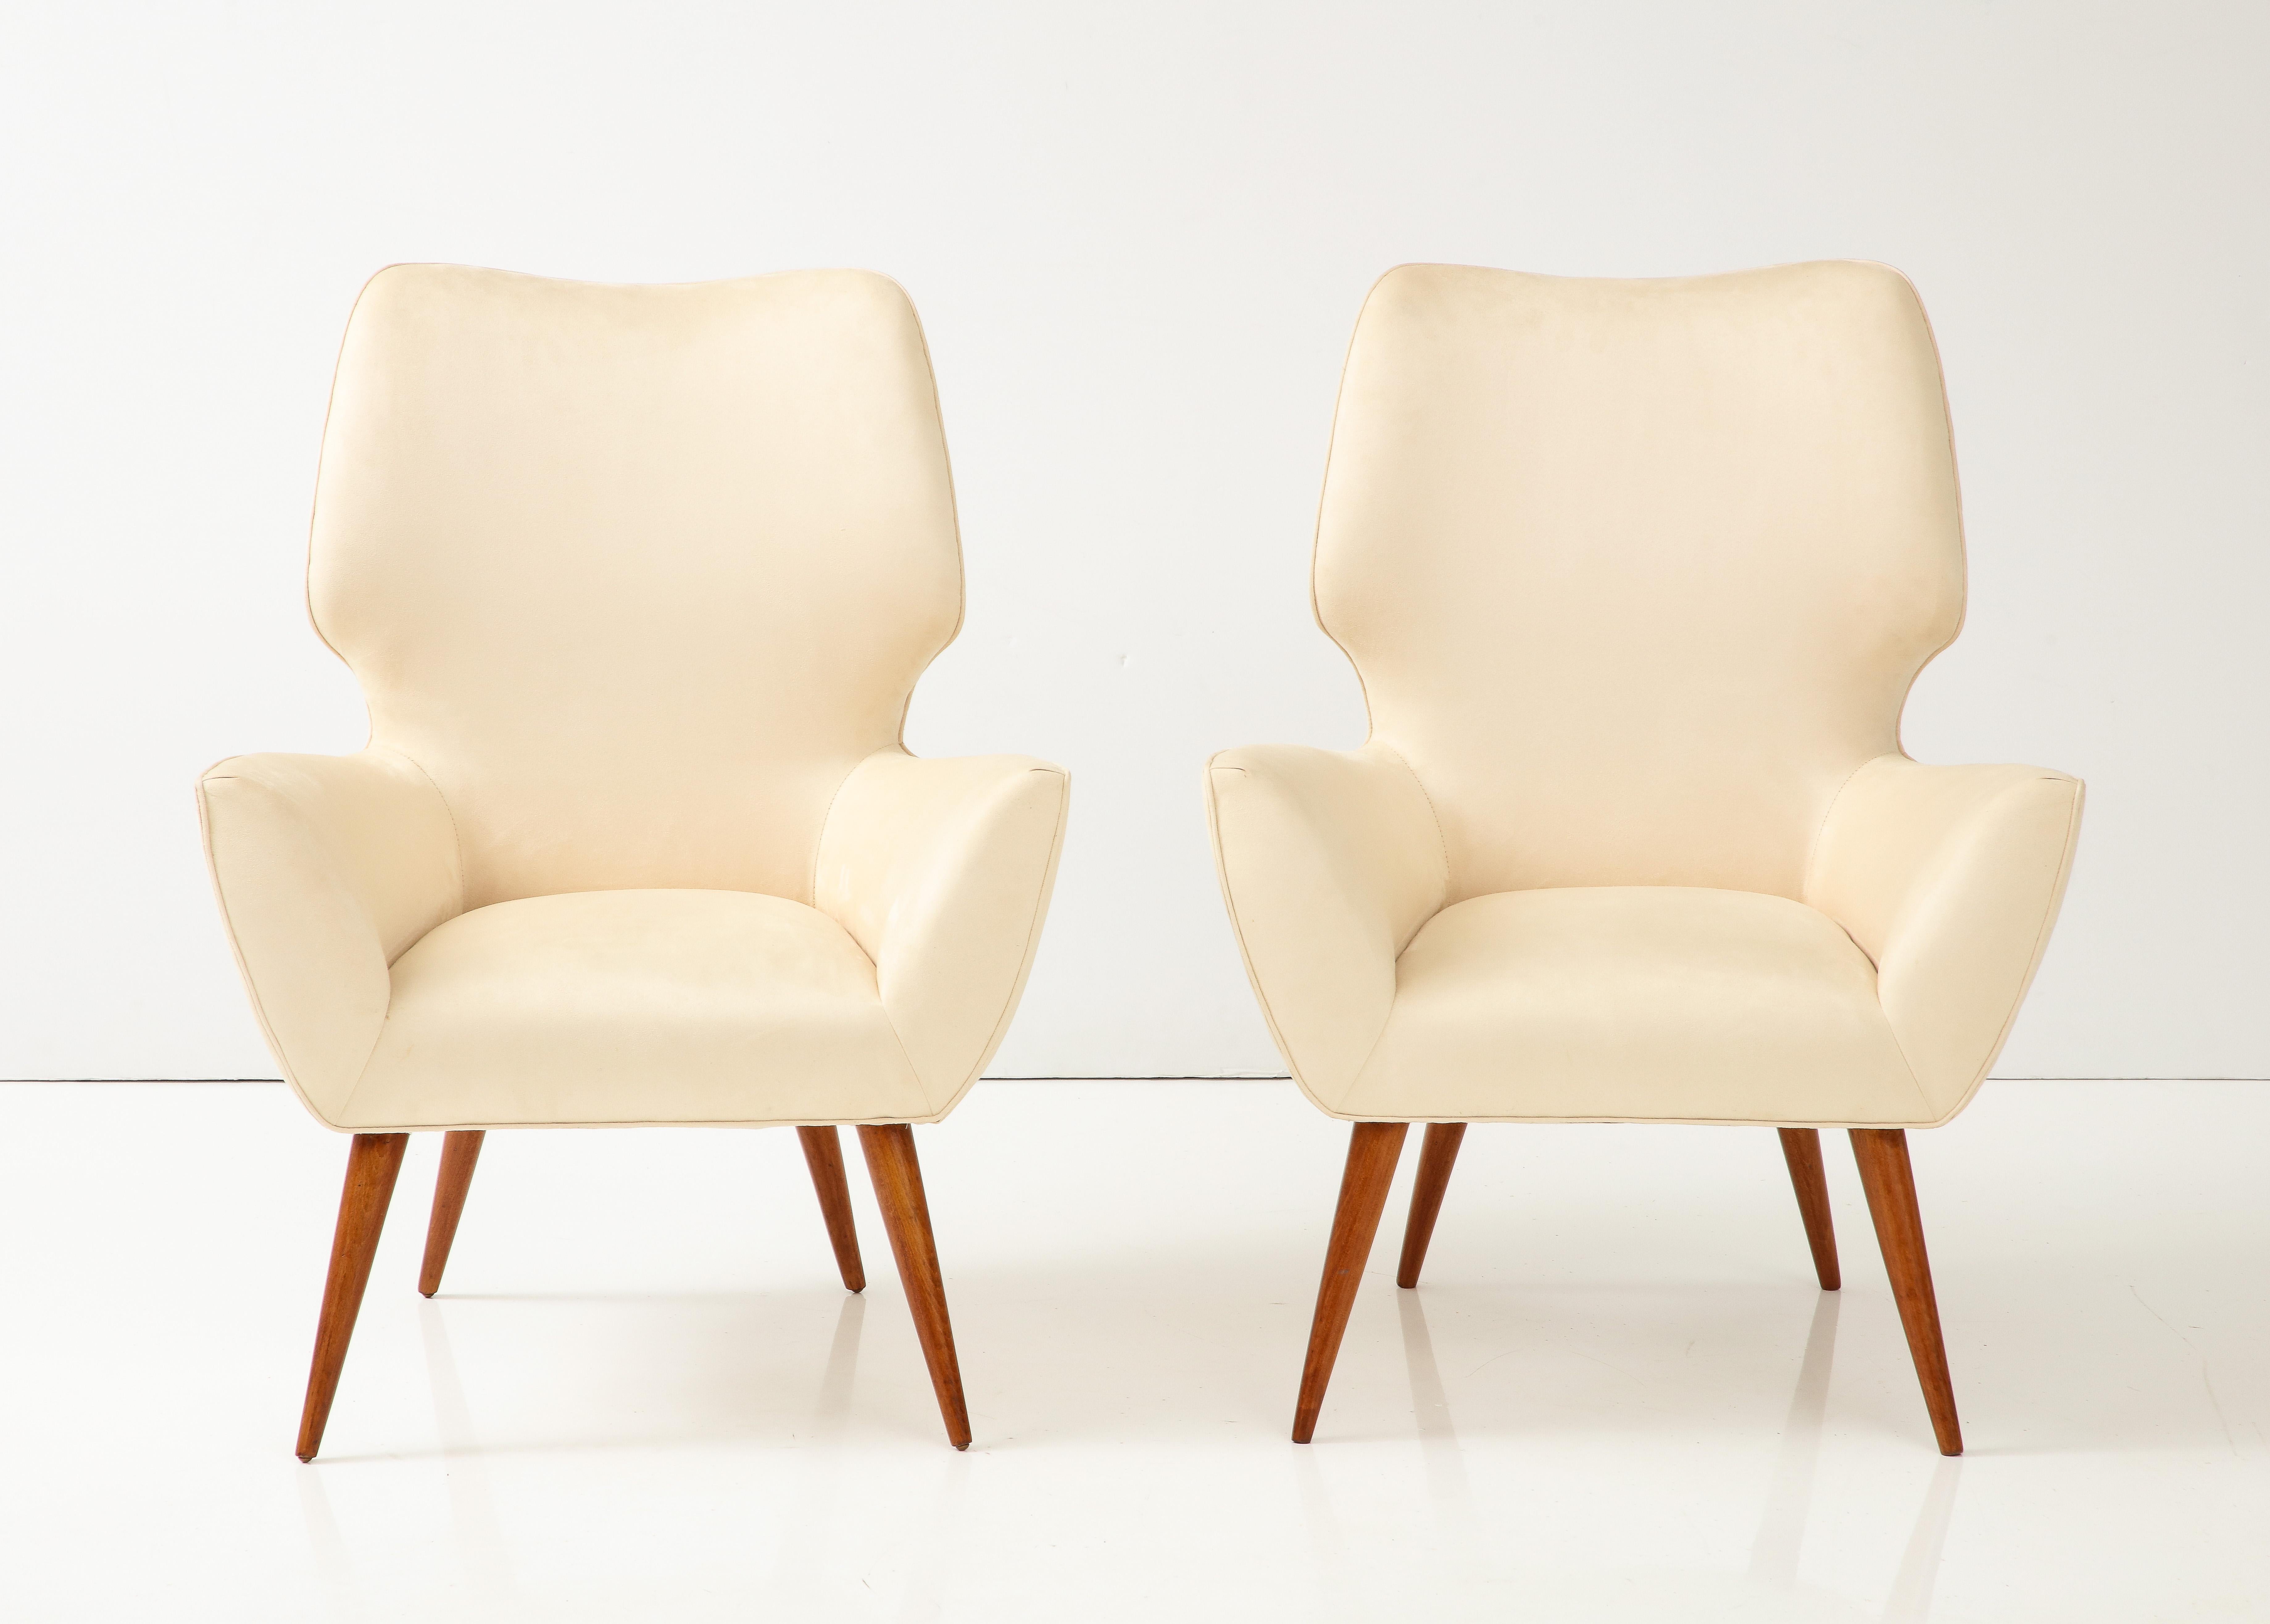 Pair of Italian armchairs with highly sculptural backrests and sides supported on elegantly tapered wood legs.  Newly refinished and upholstered in a creamy faux suede. 
Italy, circa 1940's 
Size: 34 1/4